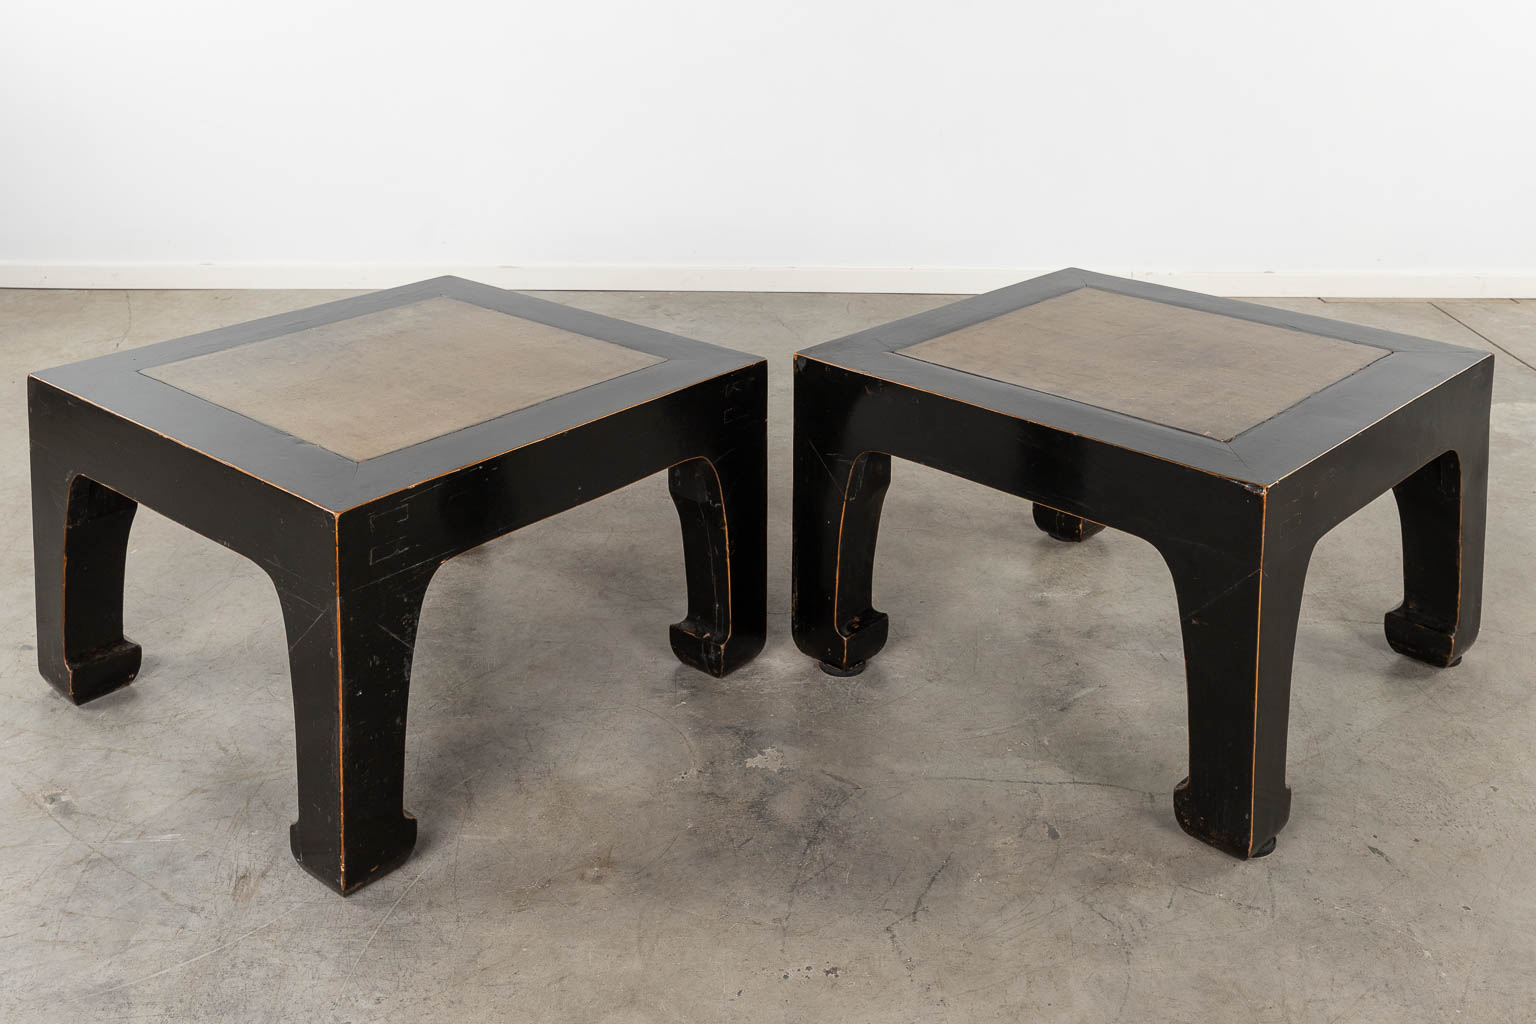 A pair of Chinese coffee tables, black lacquered with a stone top. 19th C. (D:73 x W:73 x H:47 cm)